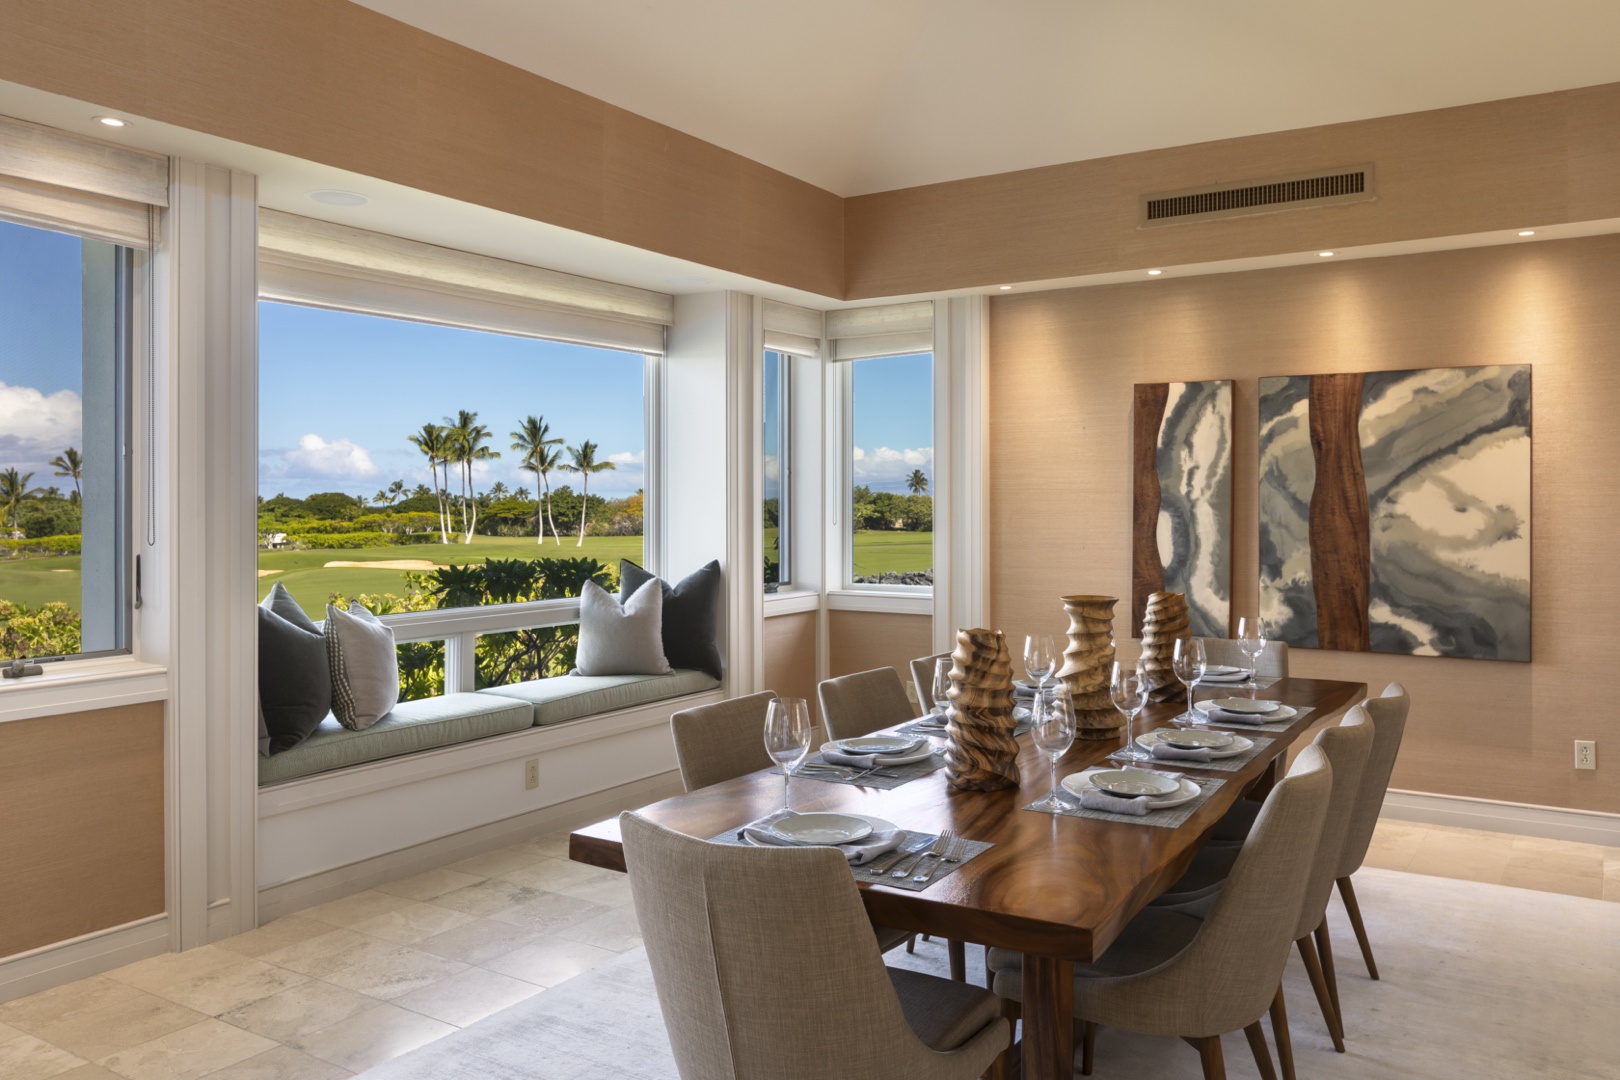 Kailua Kona Vacation Rentals, 3BD Palm Villa (130B) at Four Seasons Resort at Hualalai - Stunning interior dining for eight, featuring a picture-perfect window seat, ideal for a book or a cat nap